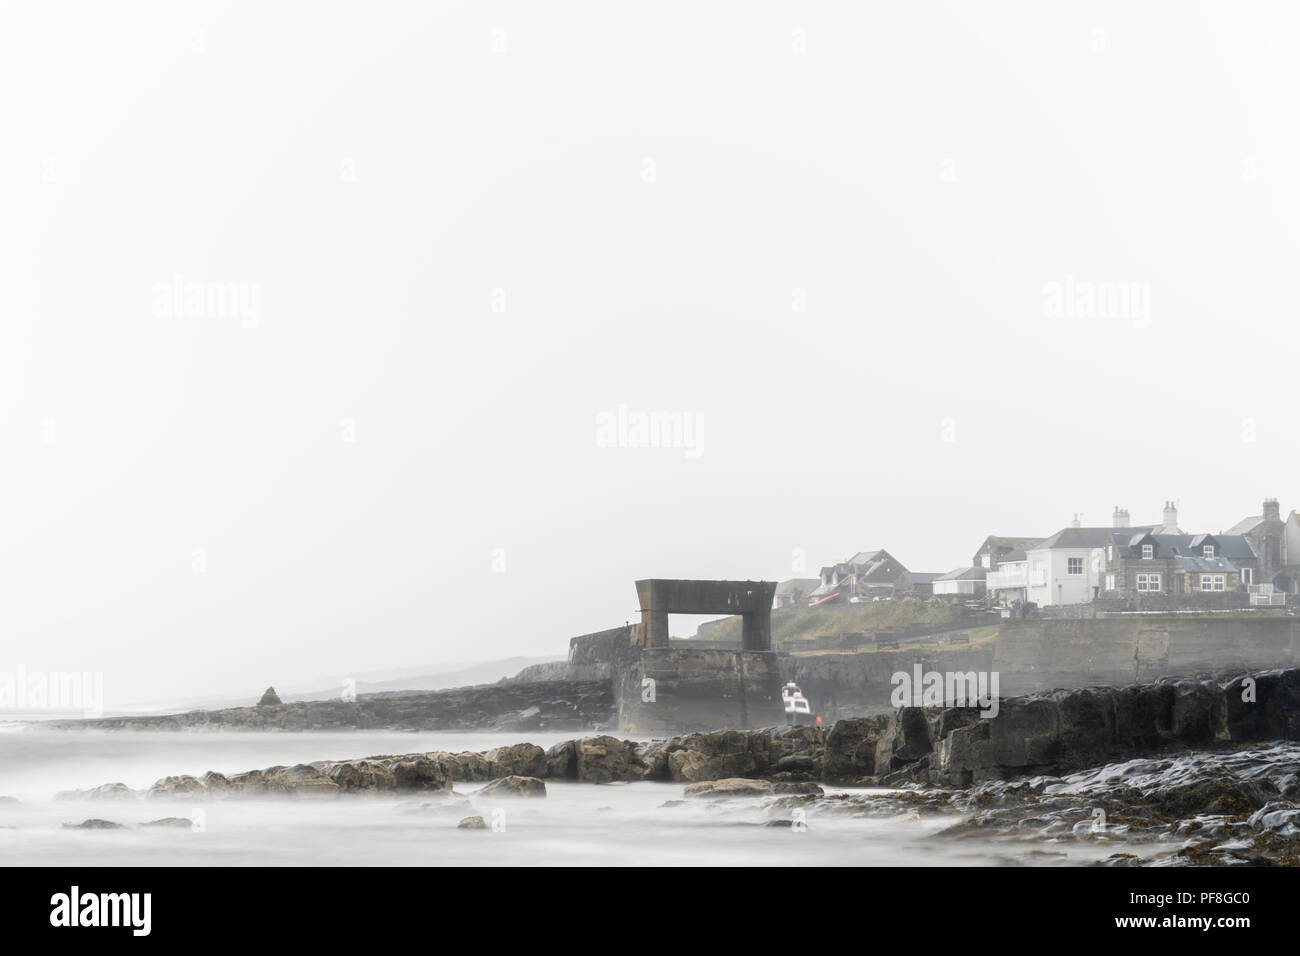 Misty summer morning producing a high key effect, looking towards the village of Craster on the Northumbrian Coast, Northumberland, England Stock Photo